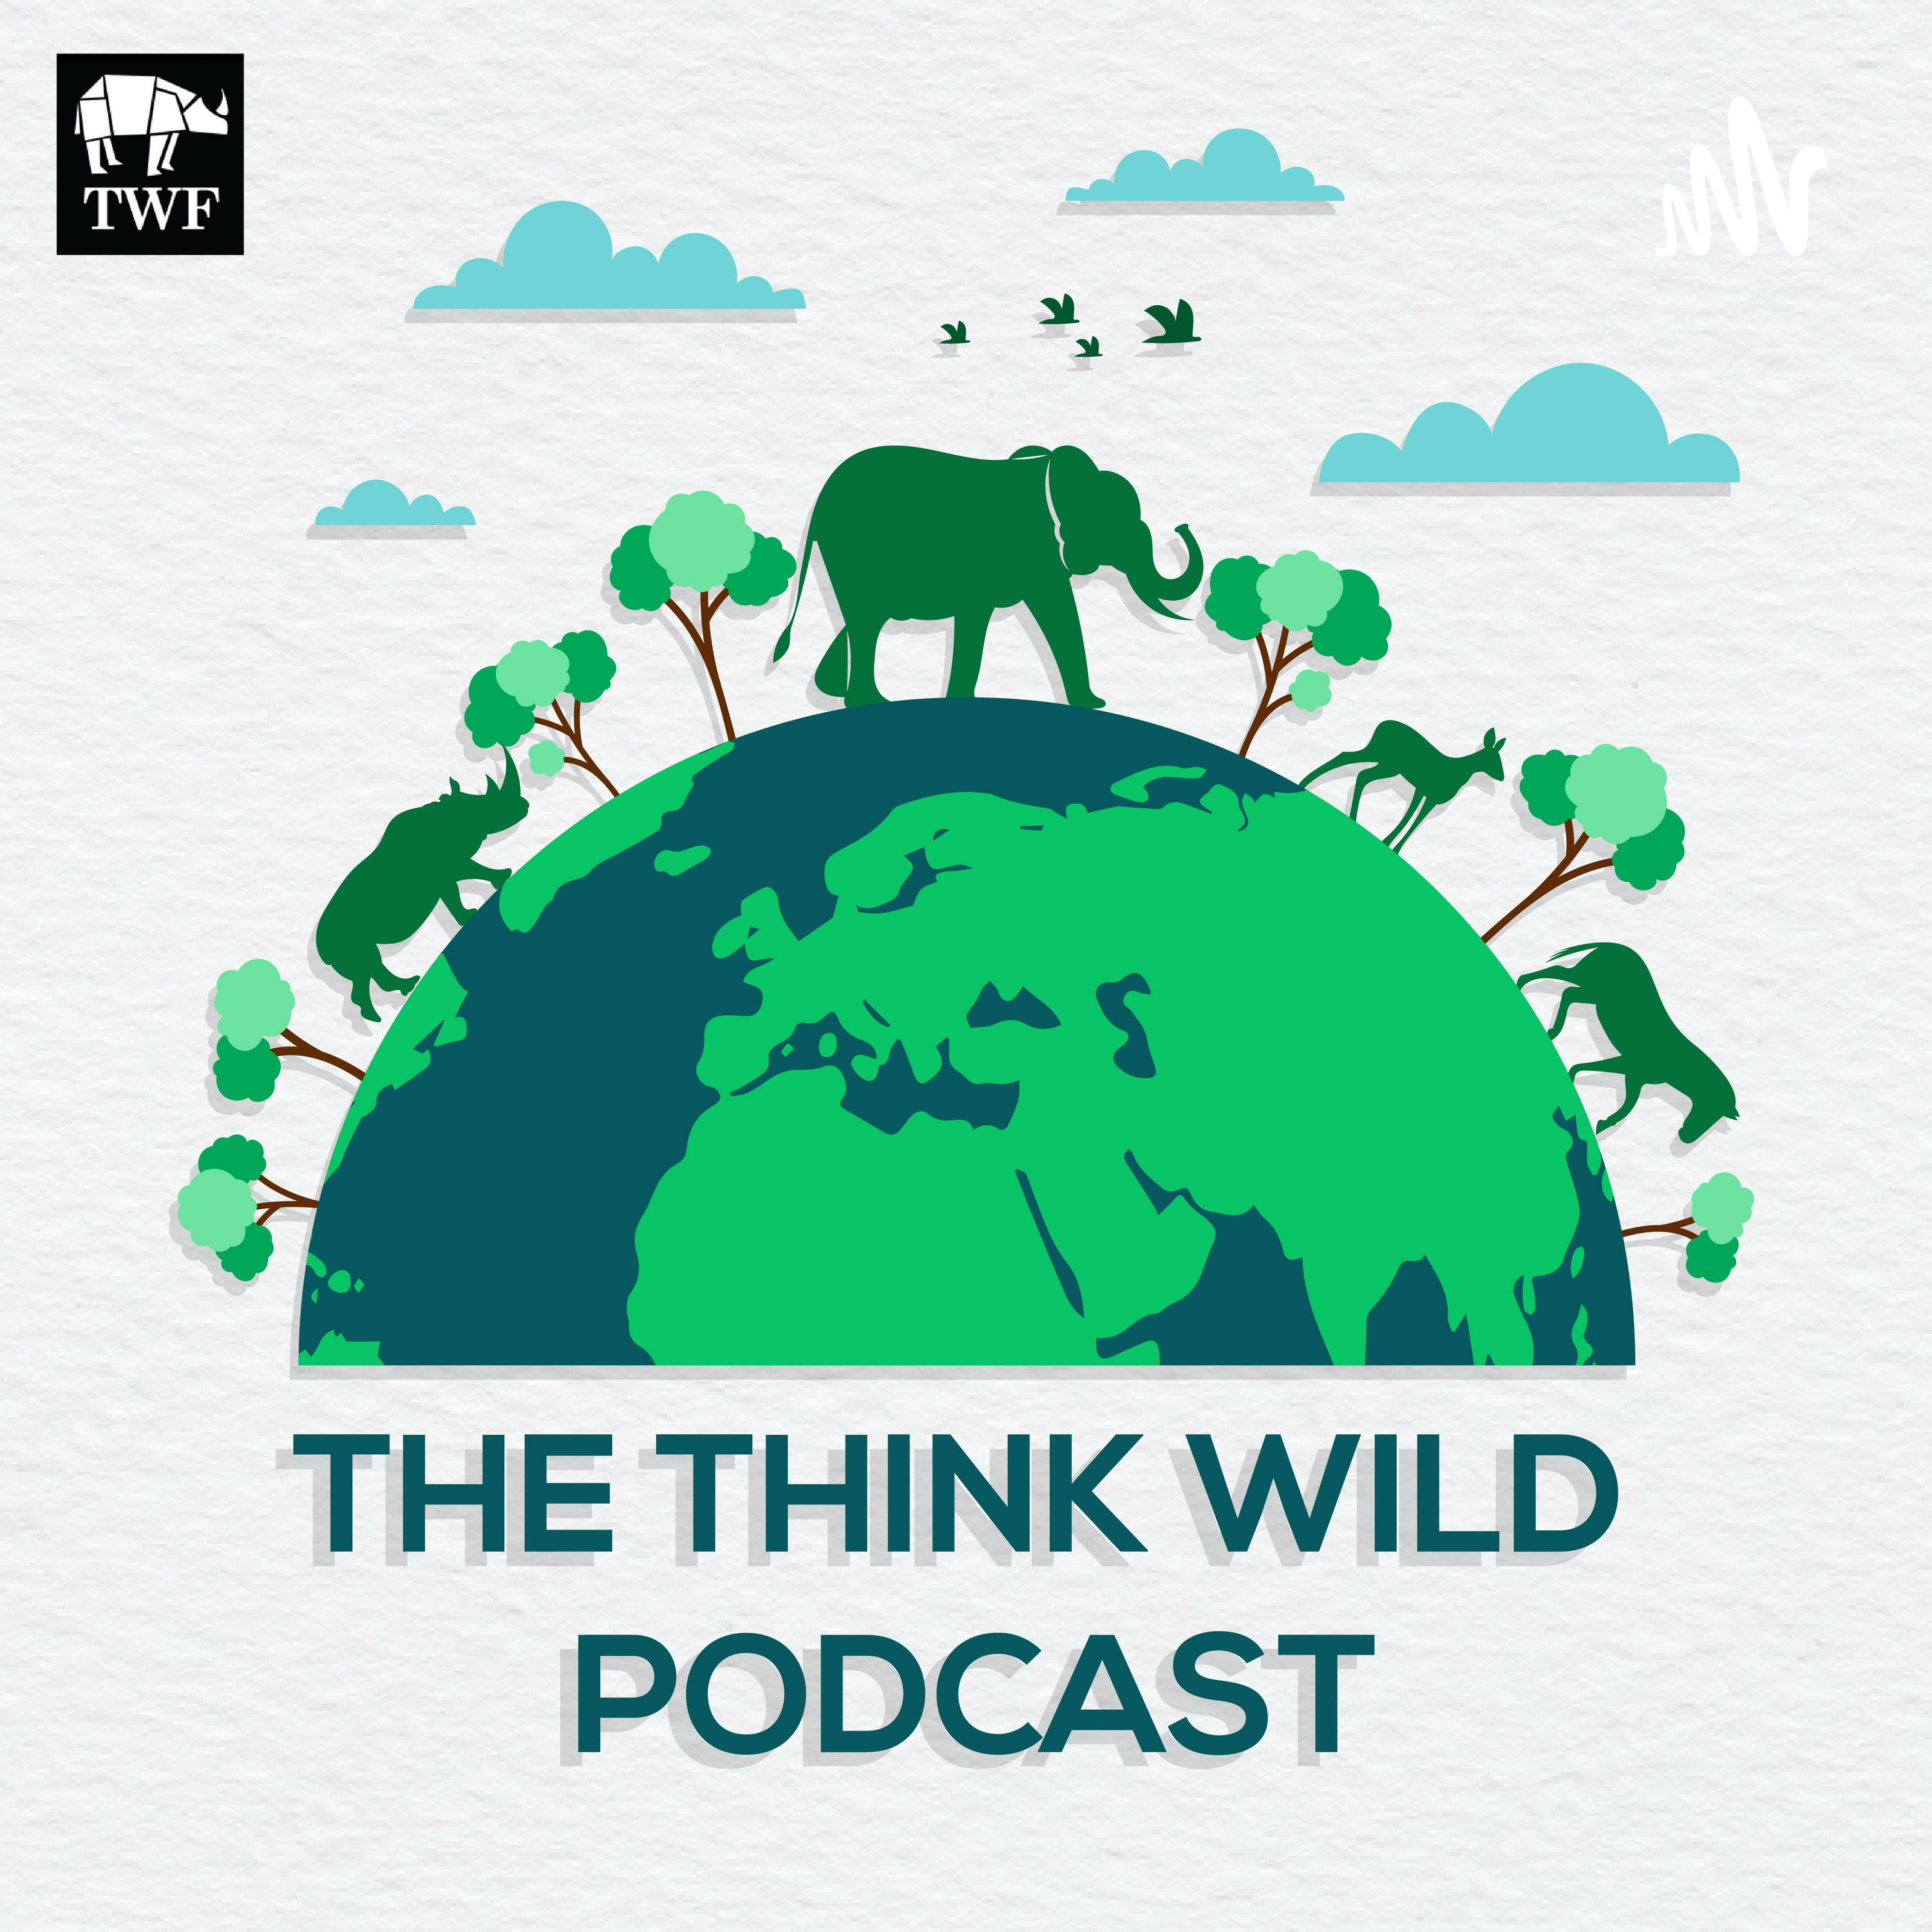 Episode 48: The Growing Challenges of Human Carnivore Conflict with Dr. Andrew Stein, Founder and Director of CLAW Conservancies